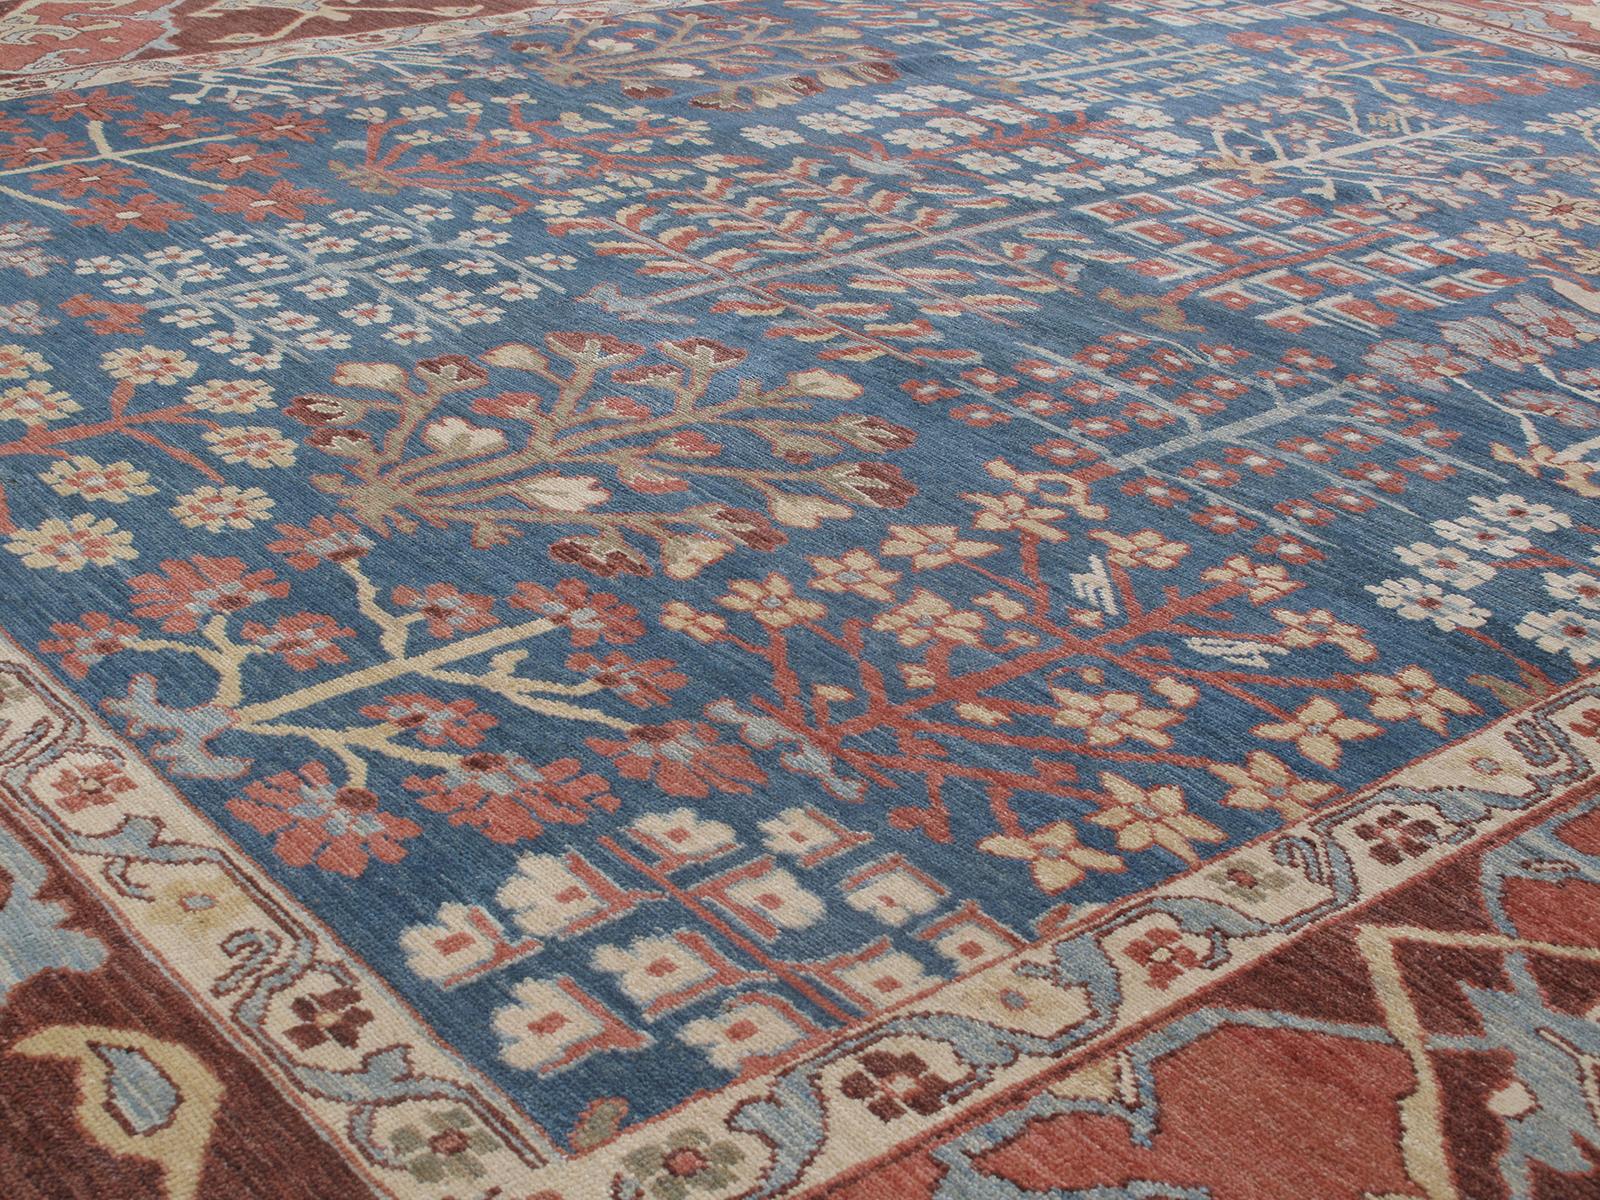 This Persian tribal hand-knotted rug is crafted with the finest hand-carded, hand-spun wool, and is made with all natural dyes. It resembles the antique original pieces designed by the Kurdish weavers in the northwestern part of Iran. Custom sizes